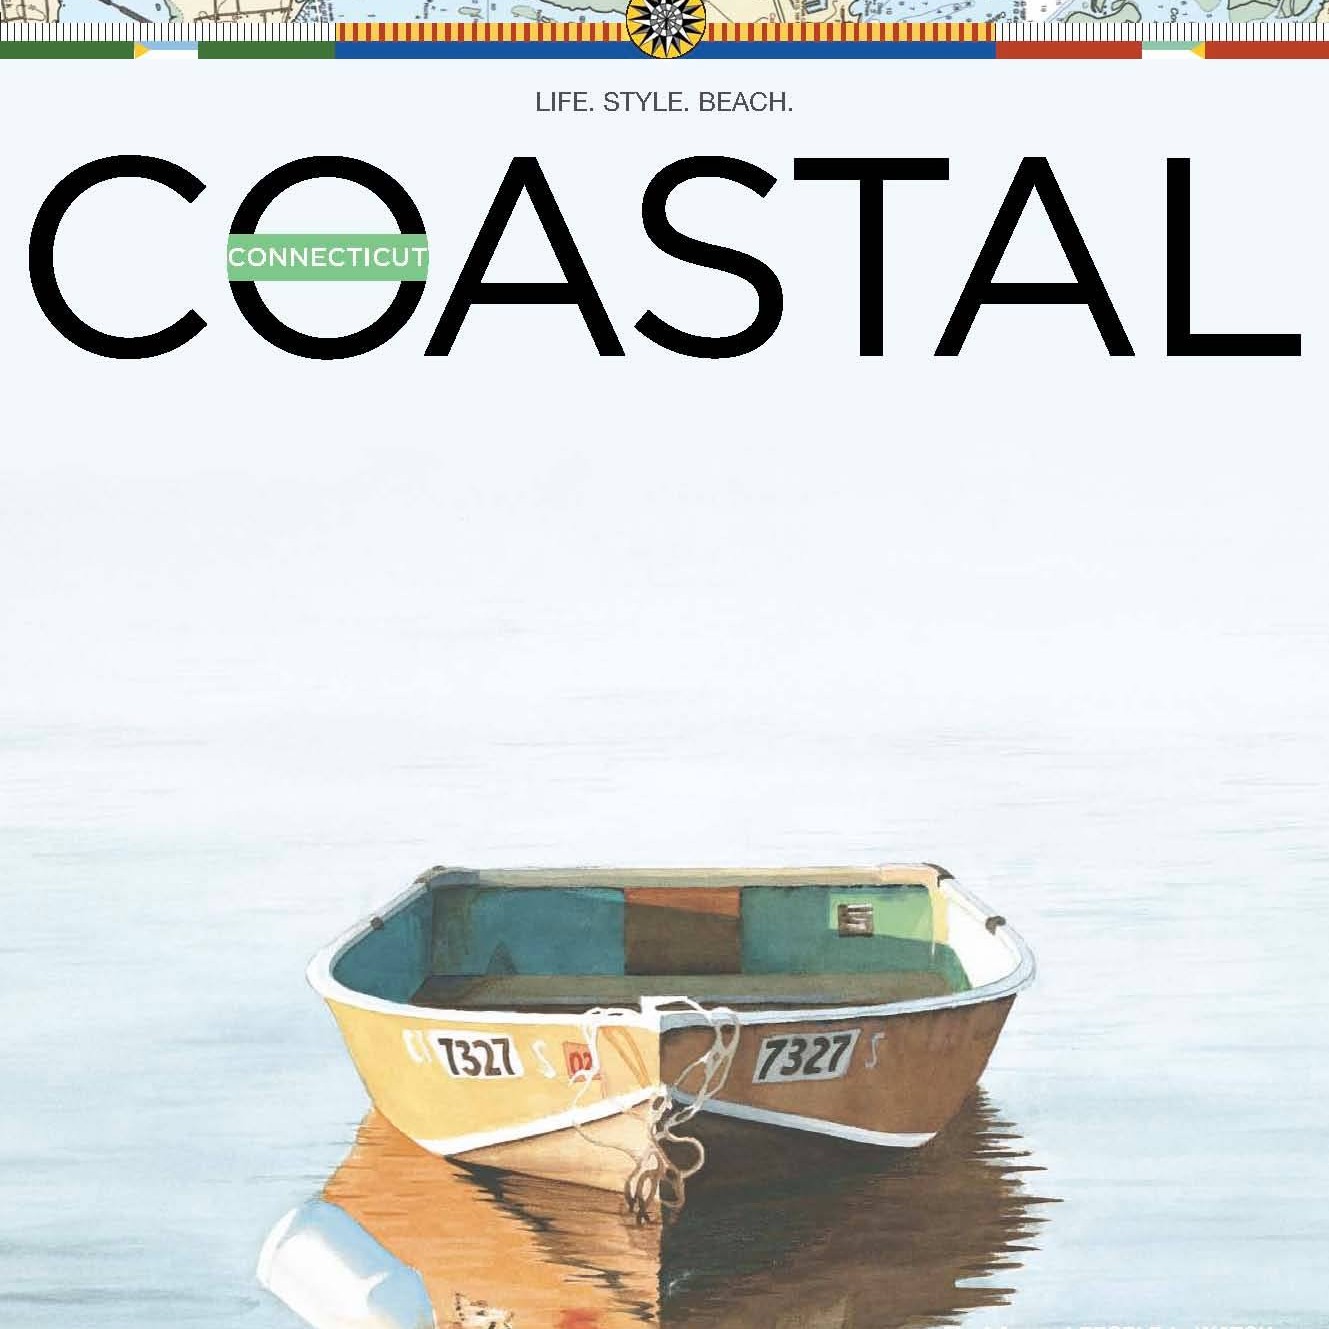 7 People to Watch in Coastal Connecticut Magazine!